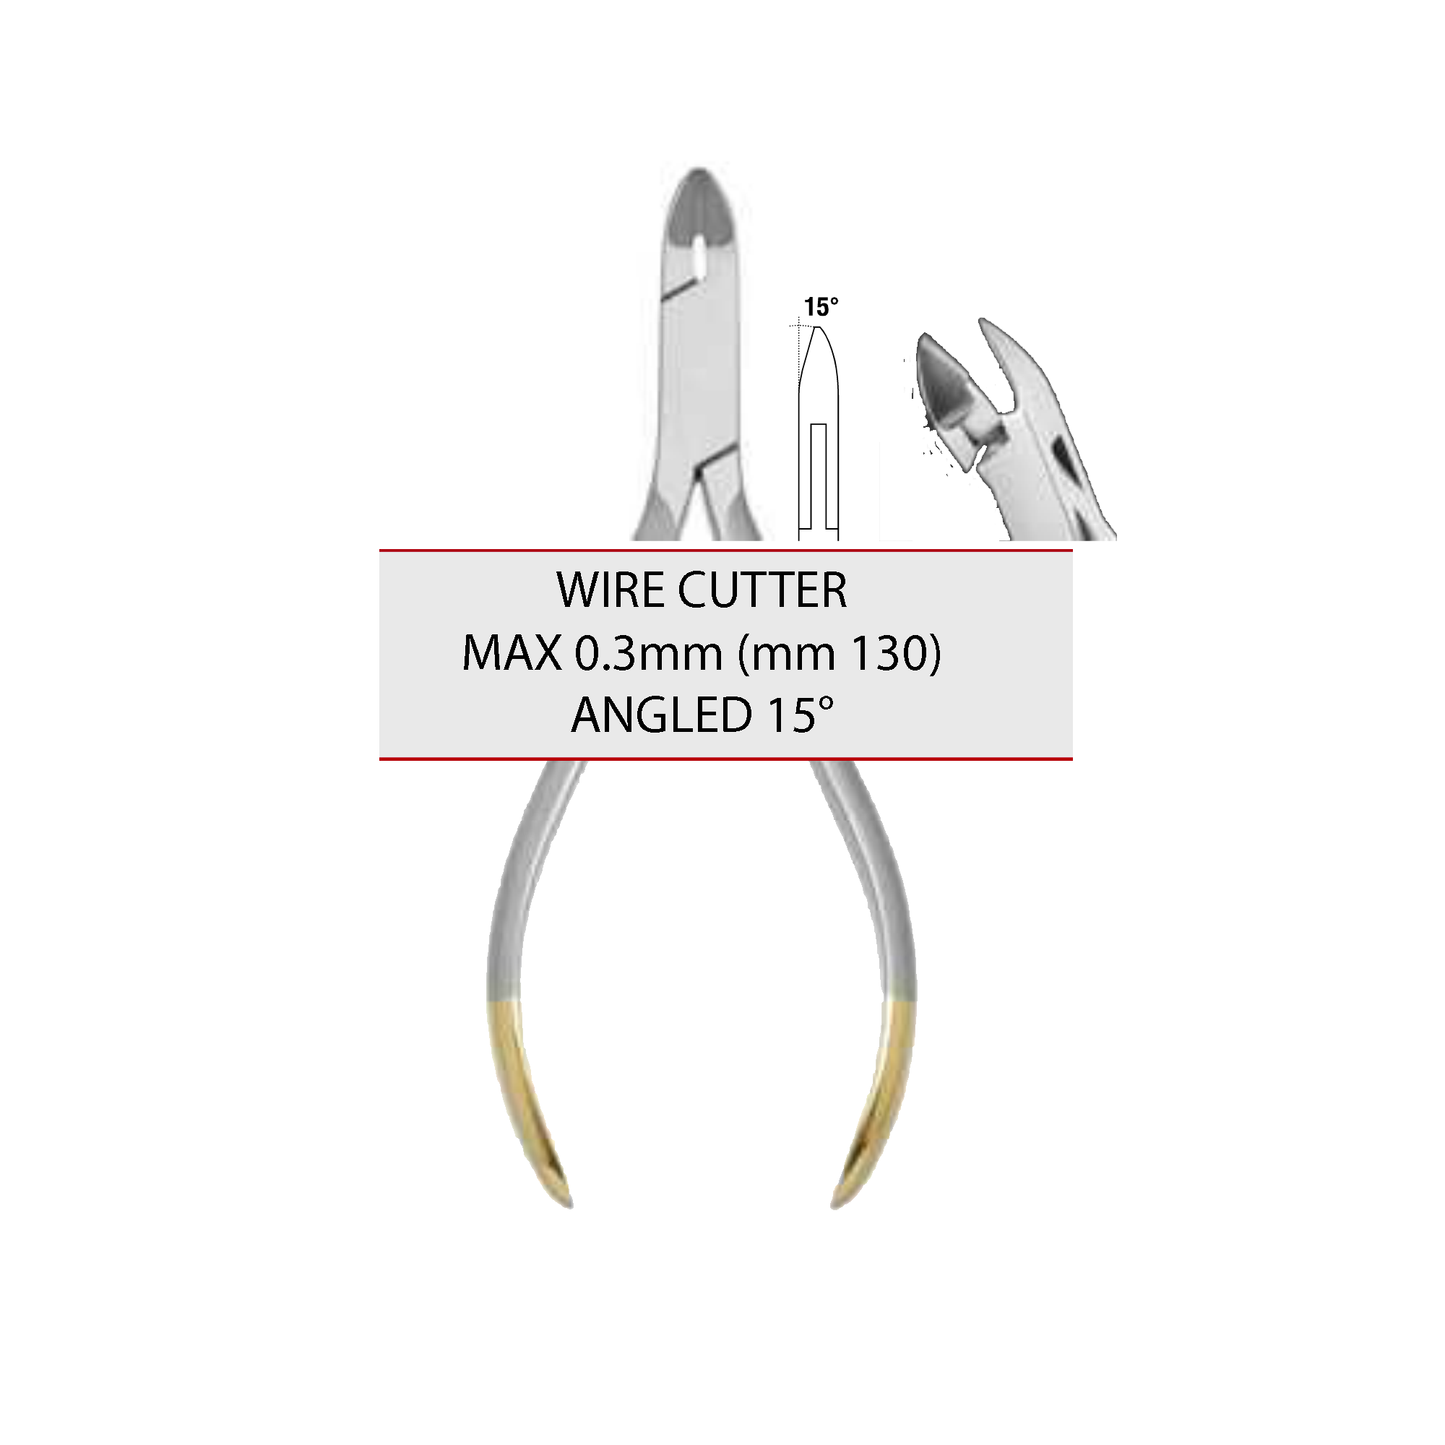 WIRE CUTTER 0.3mm (mm 130) ANGLED 15° cod 1022-1